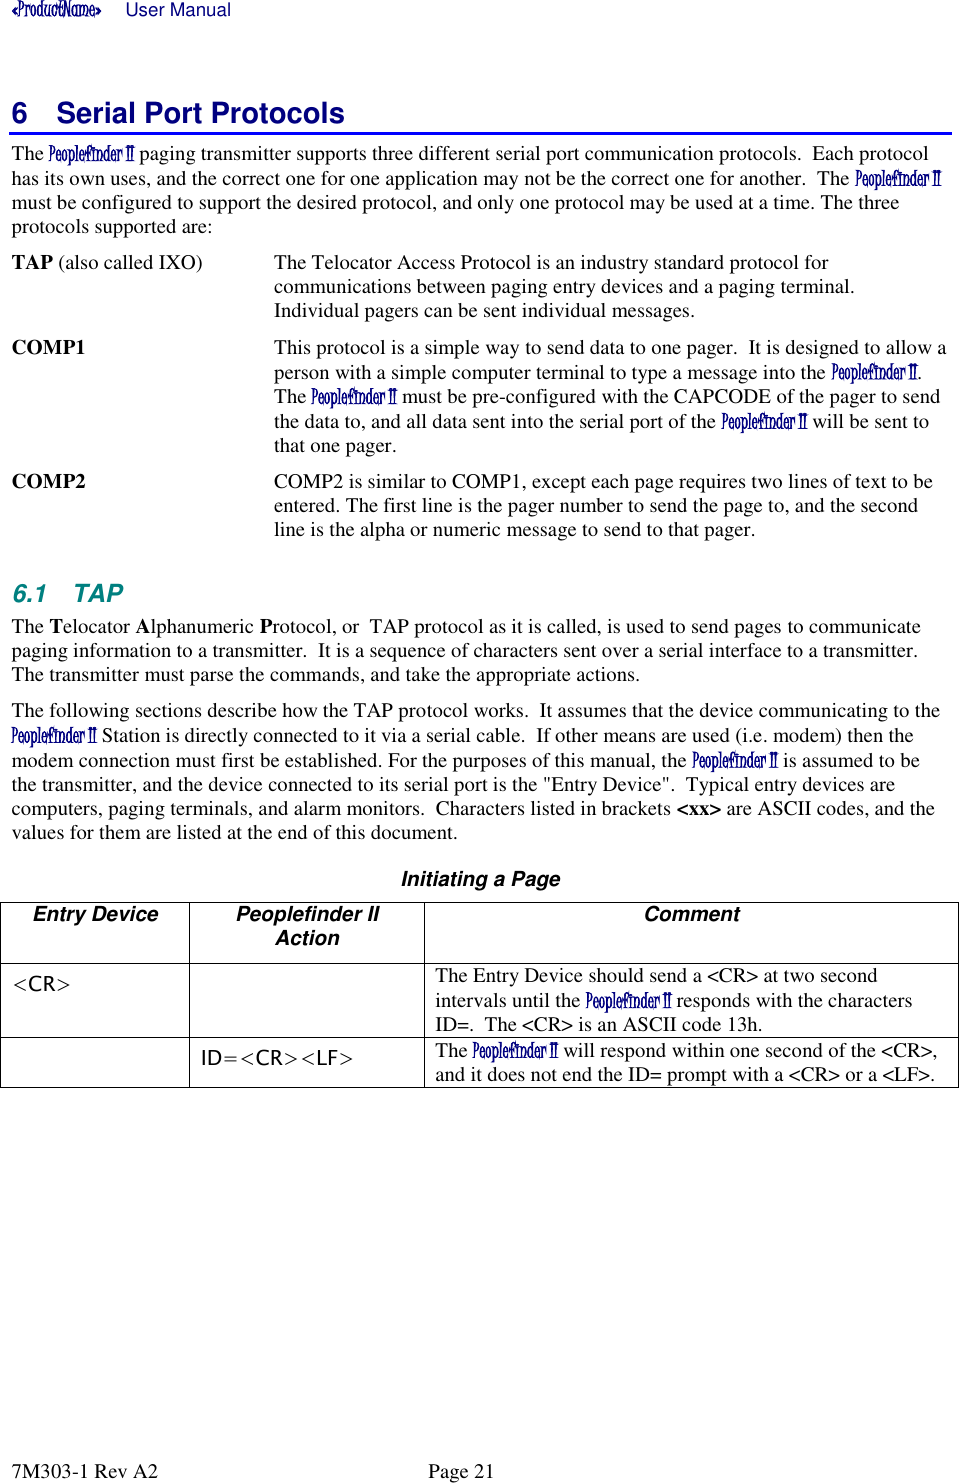 «ProductName»      User Manual      7M303-1 Rev A2  Page 21 6  Serial Port Protocols The Peoplefinder II paging transmitter supports three different serial port communication protocols.  Each protocol has its own uses, and the correct one for one application may not be the correct one for another.  The Peoplefinder II must be configured to support the desired protocol, and only one protocol may be used at a time. The three protocols supported are: TAP (also called IXO)  The Telocator Access Protocol is an industry standard protocol for communications between paging entry devices and a paging terminal.  Individual pagers can be sent individual messages.  COMP1  This protocol is a simple way to send data to one pager.  It is designed to allow a person with a simple computer terminal to type a message into the Peoplefinder II. The Peoplefinder II must be pre-configured with the CAPCODE of the pager to send the data to, and all data sent into the serial port of the Peoplefinder II will be sent to that one pager.  COMP2  COMP2 is similar to COMP1, except each page requires two lines of text to be entered. The first line is the pager number to send the page to, and the second line is the alpha or numeric message to send to that pager.  6.1  TAP The Telocator Alphanumeric Protocol, or  TAP protocol as it is called, is used to send pages to communicate paging information to a transmitter.  It is a sequence of characters sent over a serial interface to a transmitter.  The transmitter must parse the commands, and take the appropriate actions.   The following sections describe how the TAP protocol works.  It assumes that the device communicating to the Peoplefinder II Station is directly connected to it via a serial cable.  If other means are used (i.e. modem) then the modem connection must first be established. For the purposes of this manual, the Peoplefinder II is assumed to be the transmitter, and the device connected to its serial port is the &quot;Entry Device&quot;.  Typical entry devices are computers, paging terminals, and alarm monitors.  Characters listed in brackets &lt;xx&gt; are ASCII codes, and the values for them are listed at the end of this document.  Initiating a Page Entry Device Peoplefinder II Action Comment &lt;CR&gt;  The Entry Device should send a &lt;CR&gt; at two second intervals until the Peoplefinder II responds with the characters ID=.  The &lt;CR&gt; is an ASCII code 13h.   ID=&lt;CR&gt;&lt;LF&gt; The Peoplefinder II will respond within one second of the &lt;CR&gt;, and it does not end the ID= prompt with a &lt;CR&gt; or a &lt;LF&gt;.   